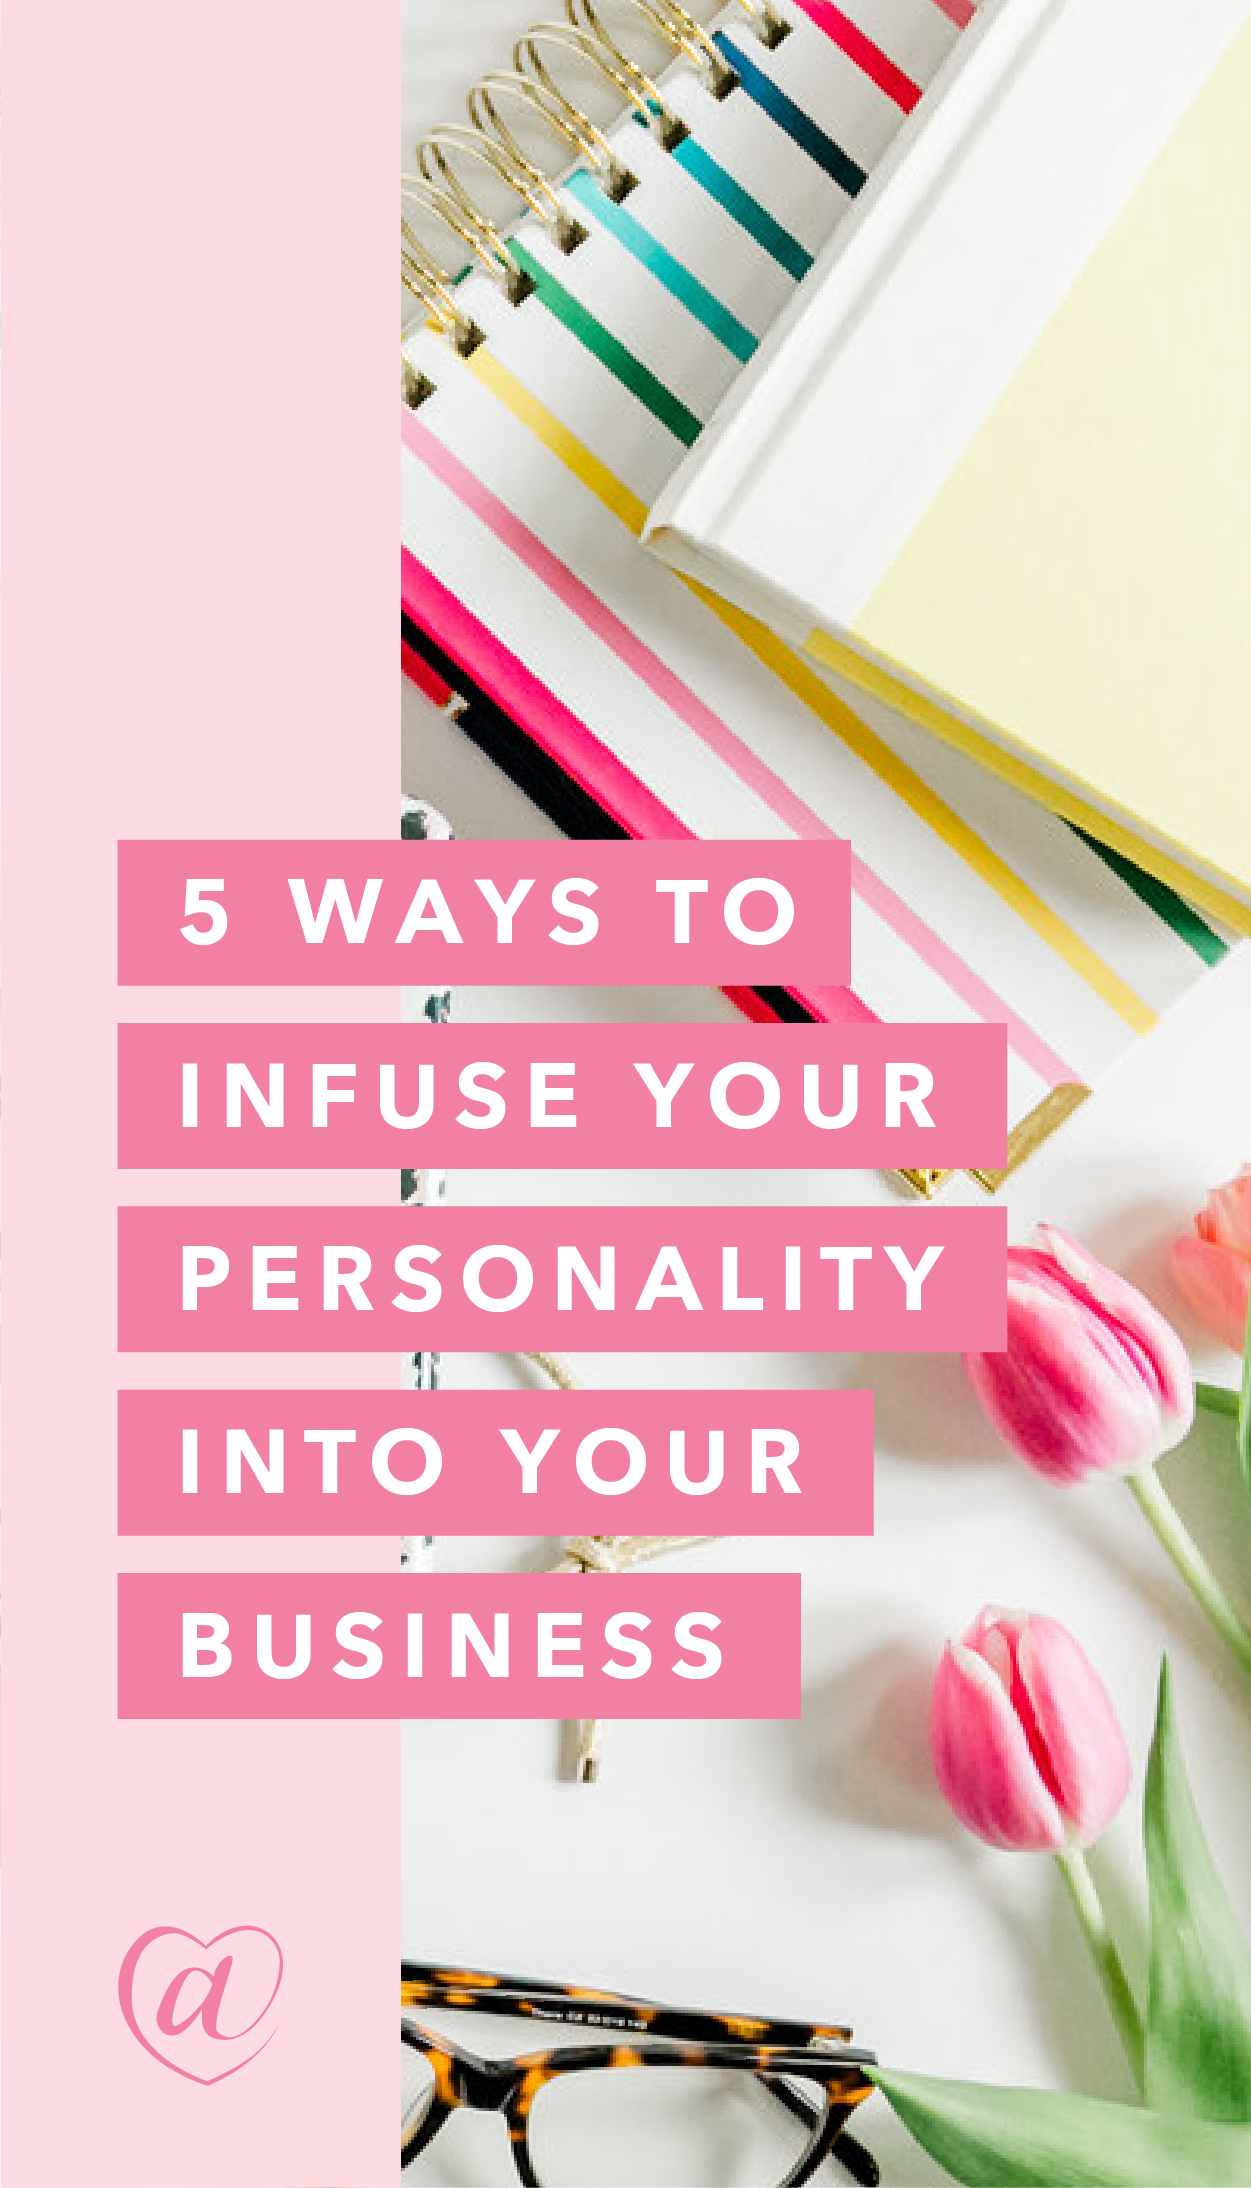 5 Ways to Infuse Your Personality into Your Business // Creative at Heart #smallbusiness #marketing #uniquevalueproposition #bizhowto #bosslady